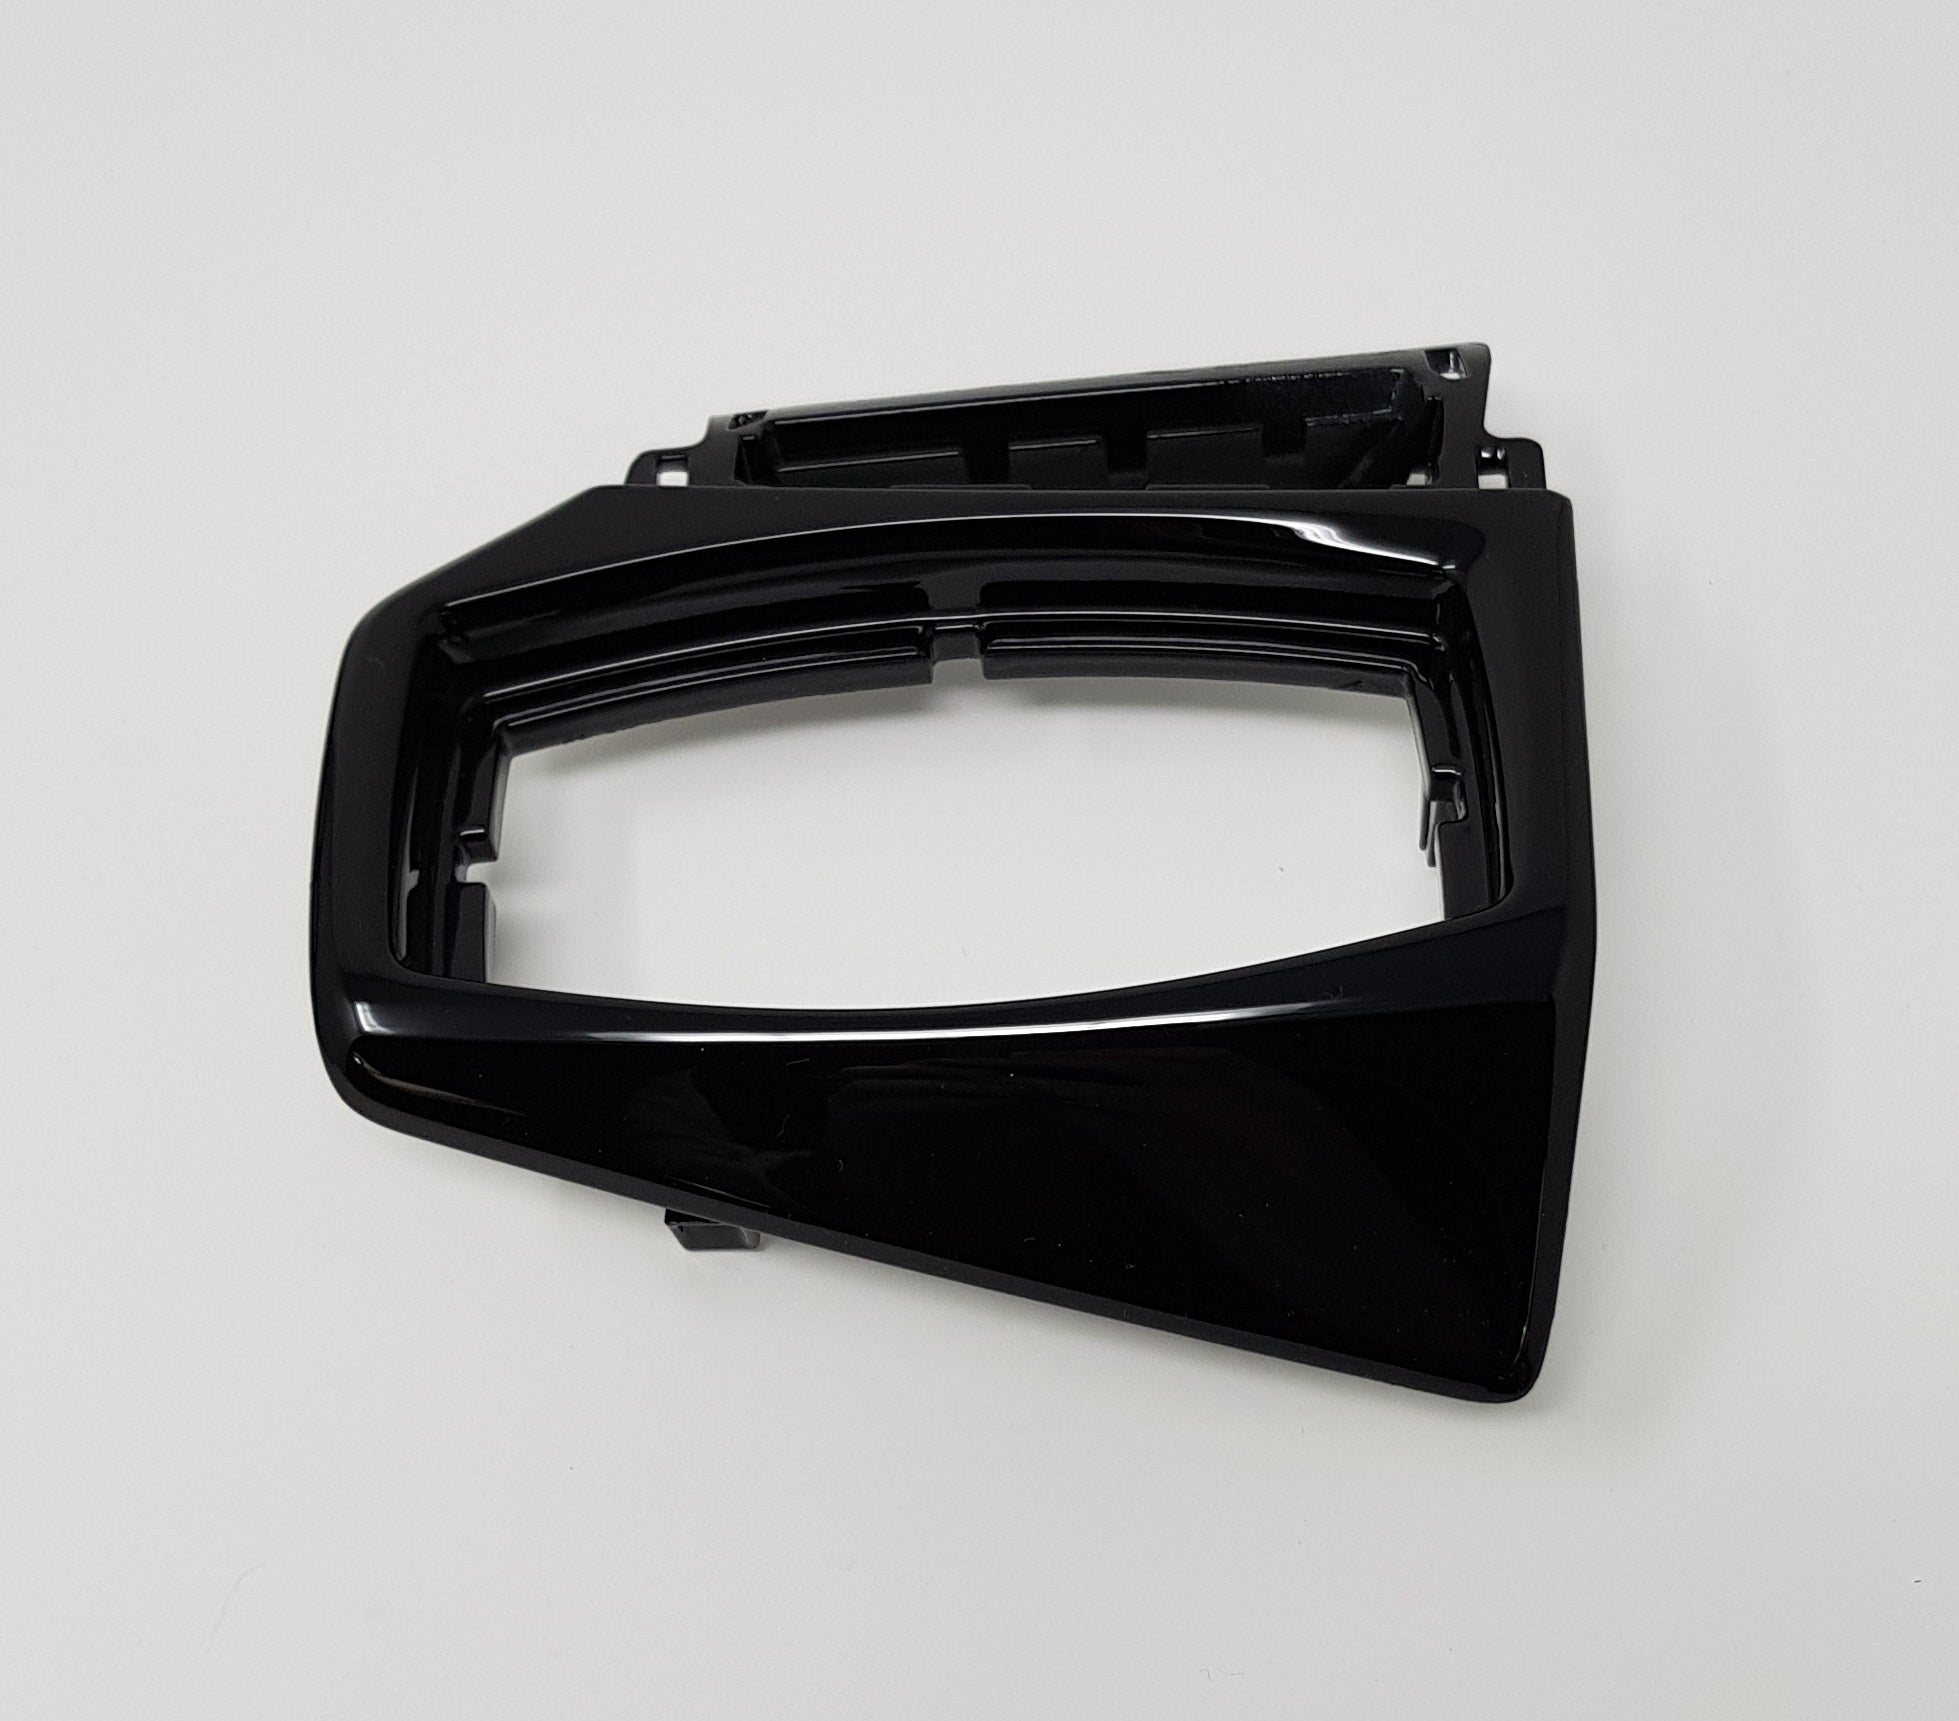 Genuine Ford Dash Vent Assemblies (Pair) - MK3.5 Focus (Painted/Hydrodipped Finishes)